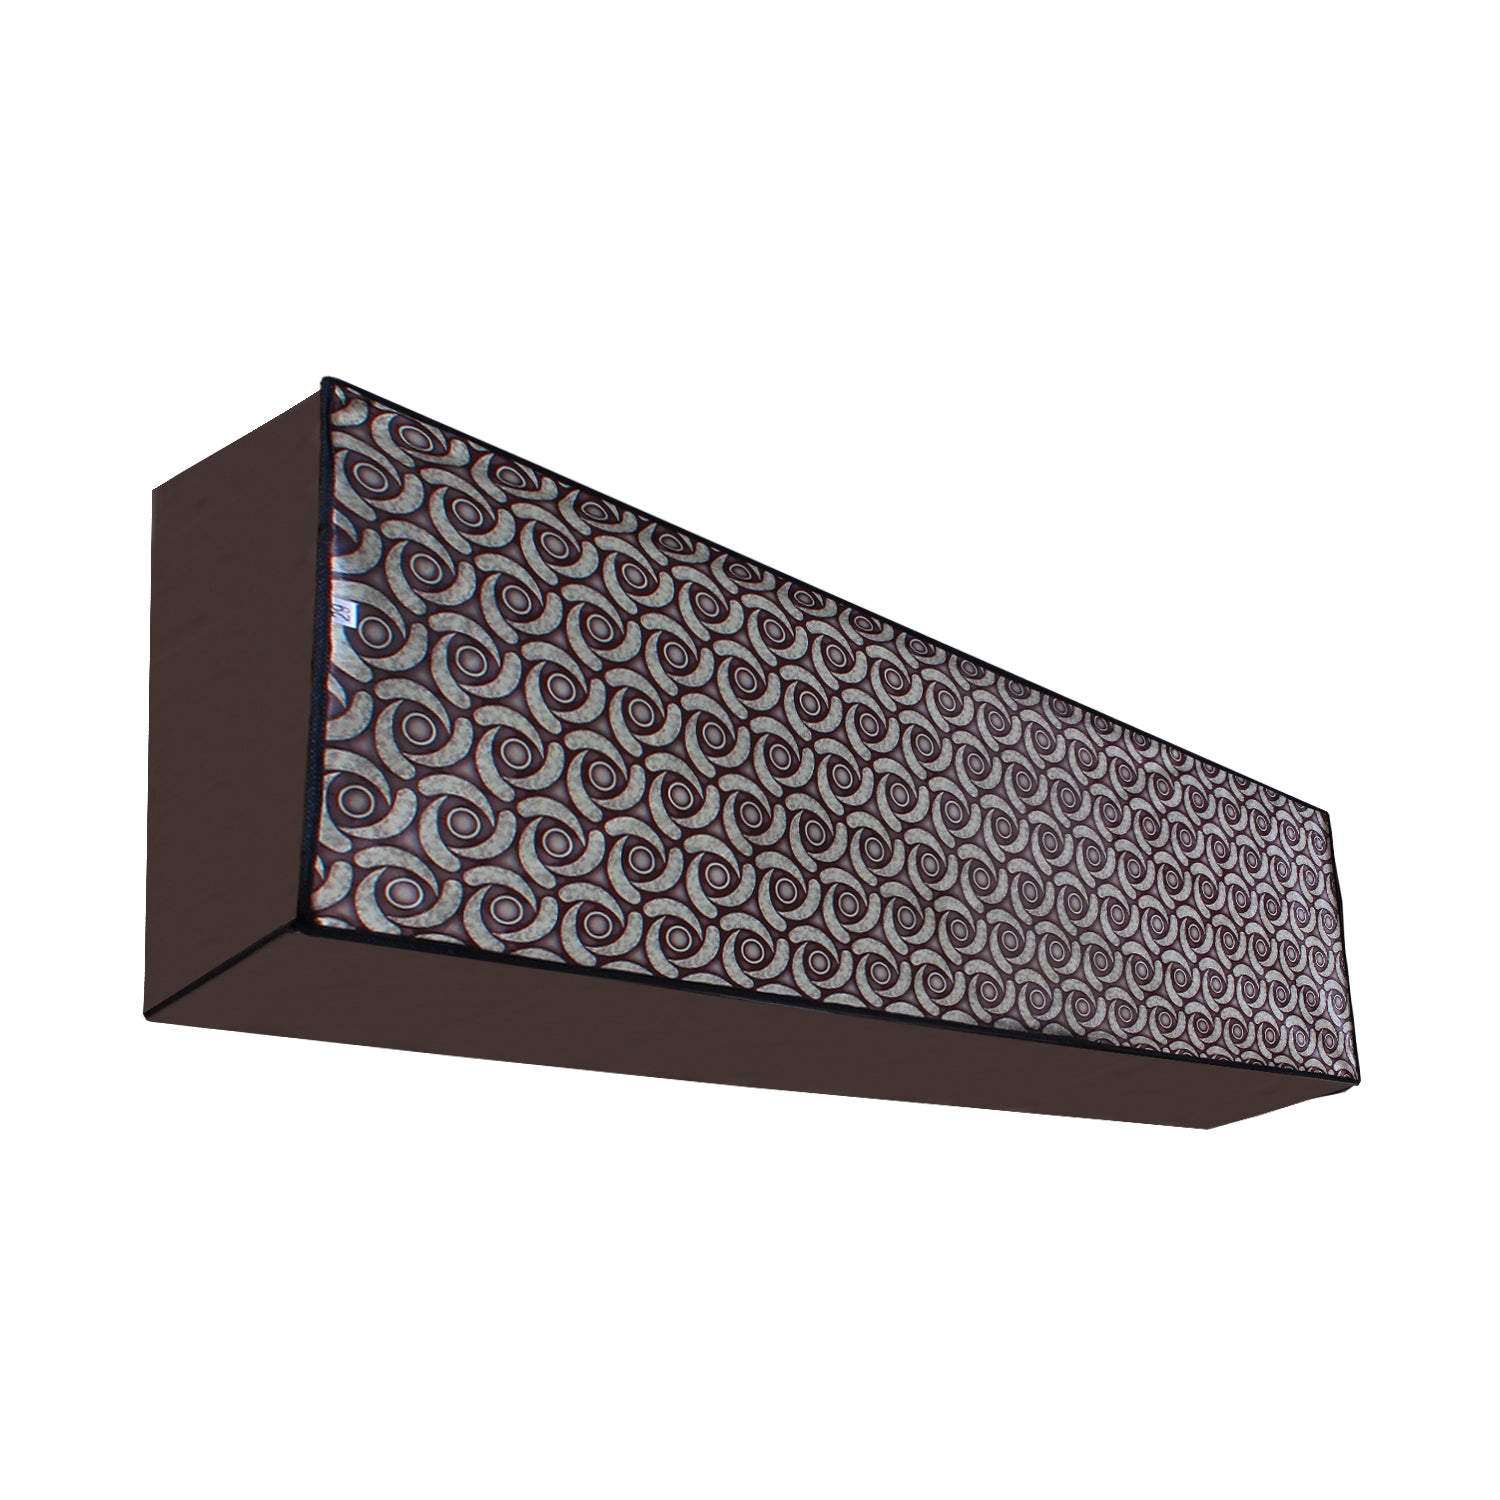 Waterproof and Dustproof Split Indoor AC Cover, SA58 - Dream Care Furnishings Private Limited